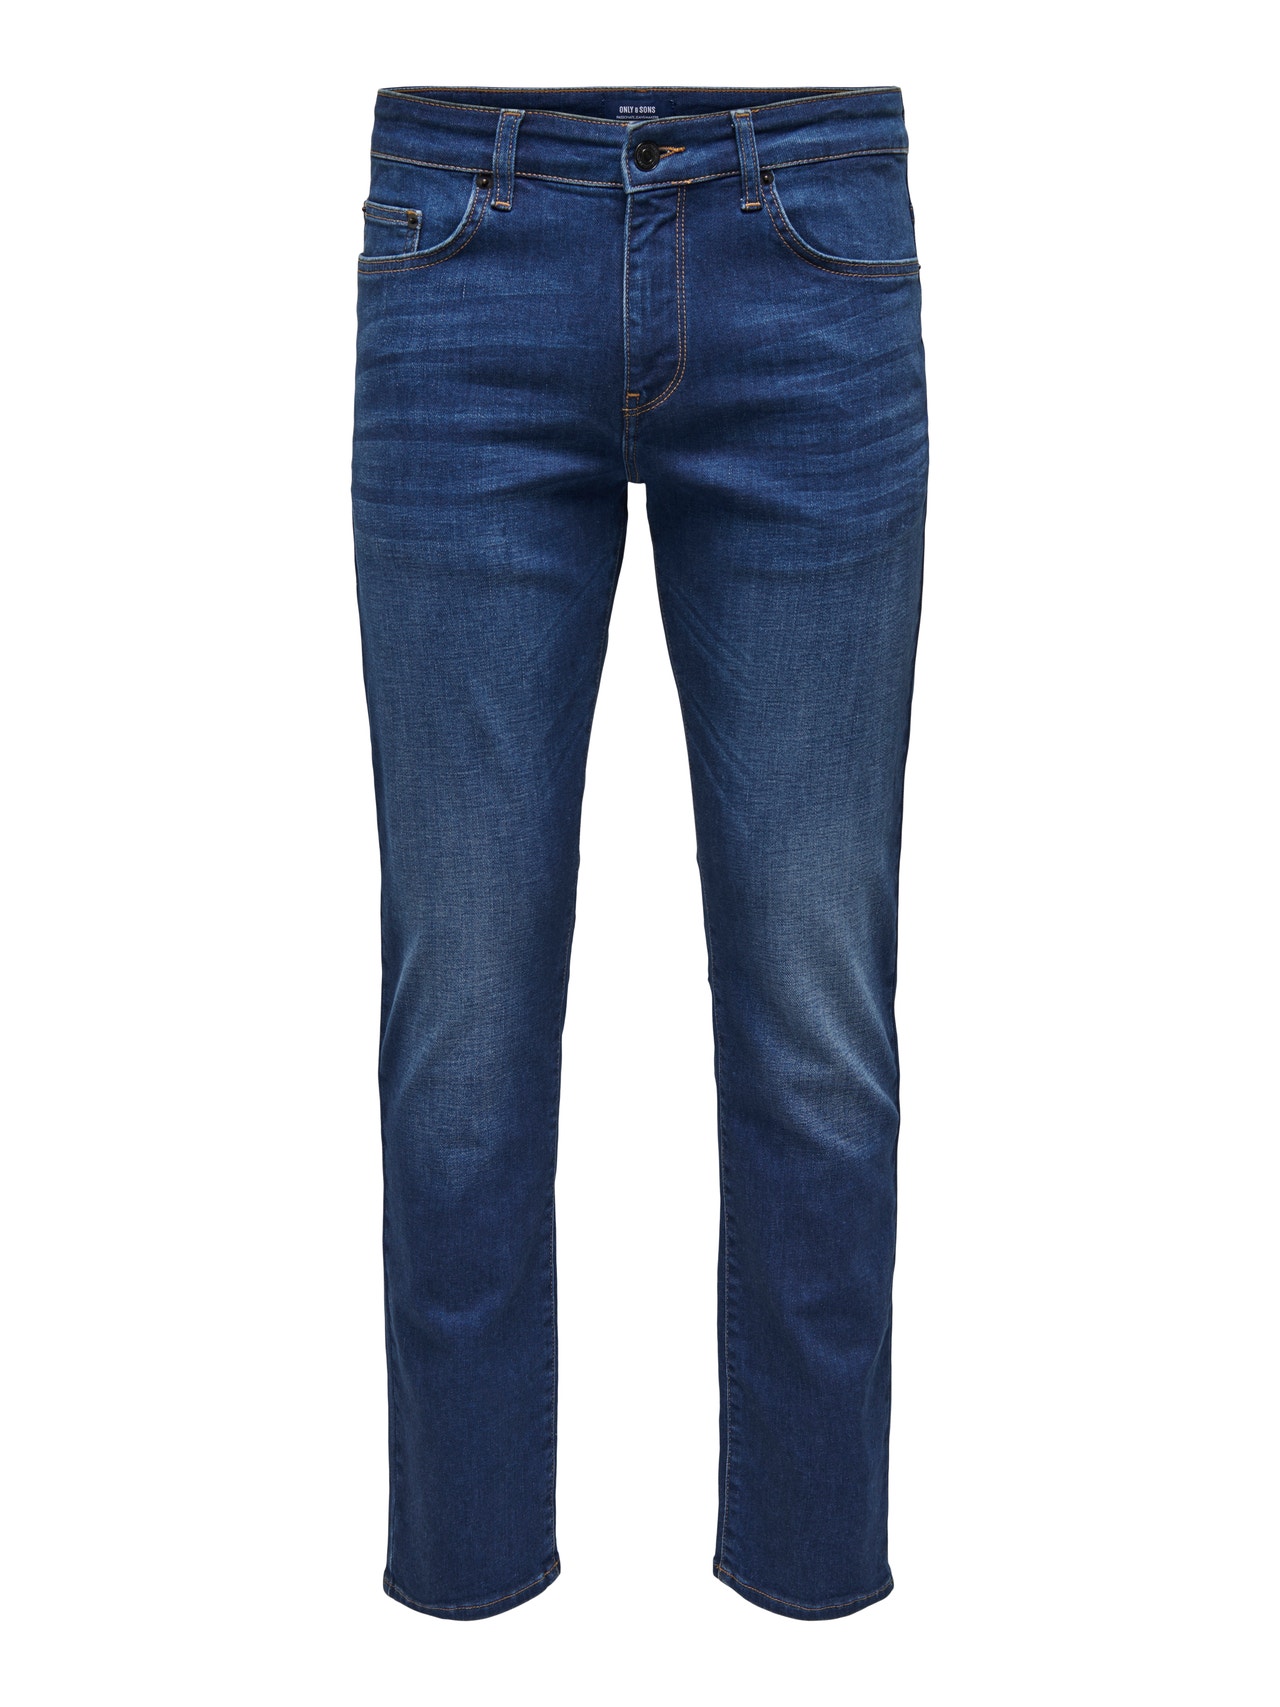 ONLY & SONS Jeans Regular Fit Taille moyenne -Dark Blue Denim - 22026776